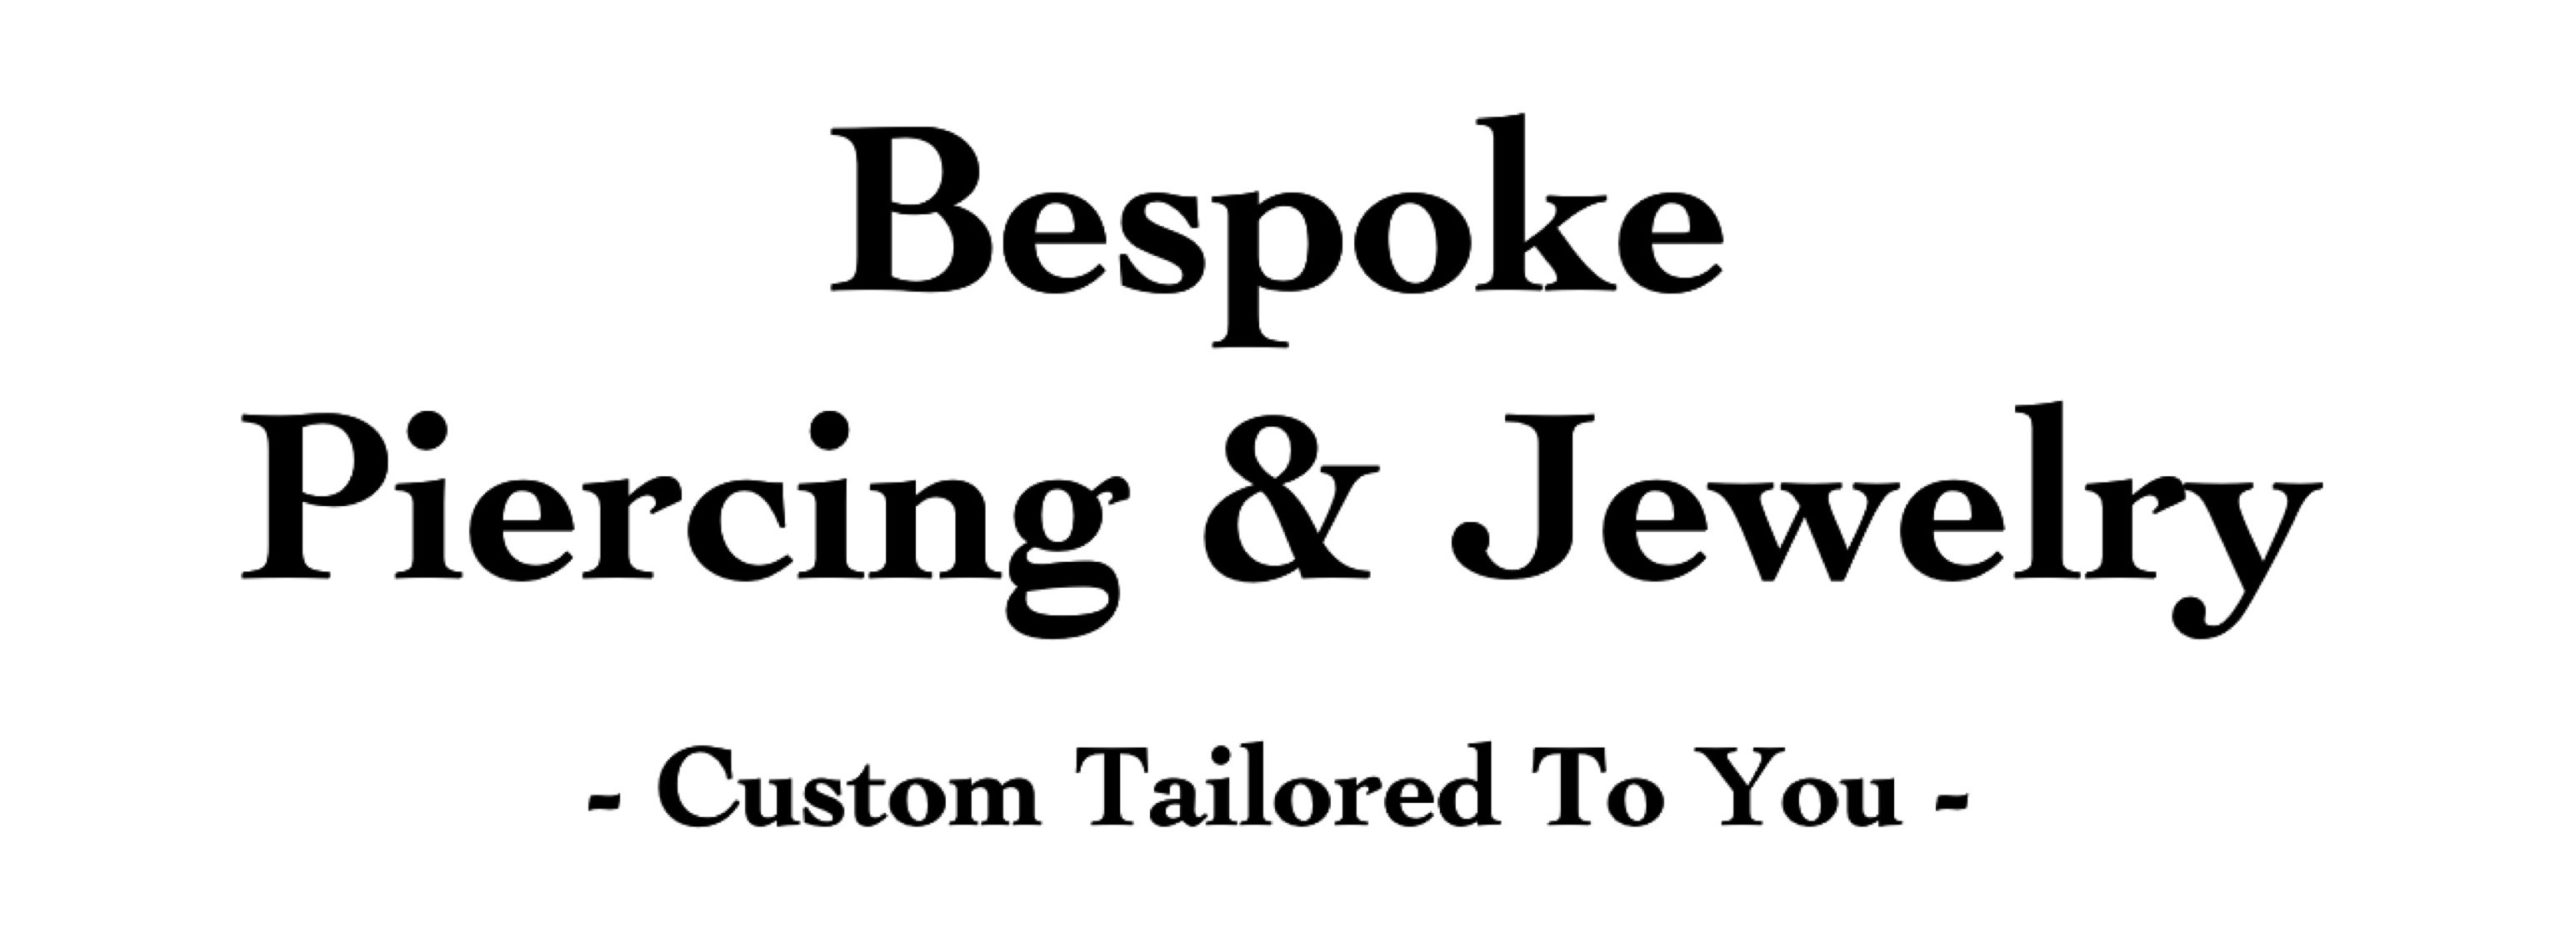 Bespoke Piercing & Jewelry – Providing your piercing and jewelry needs